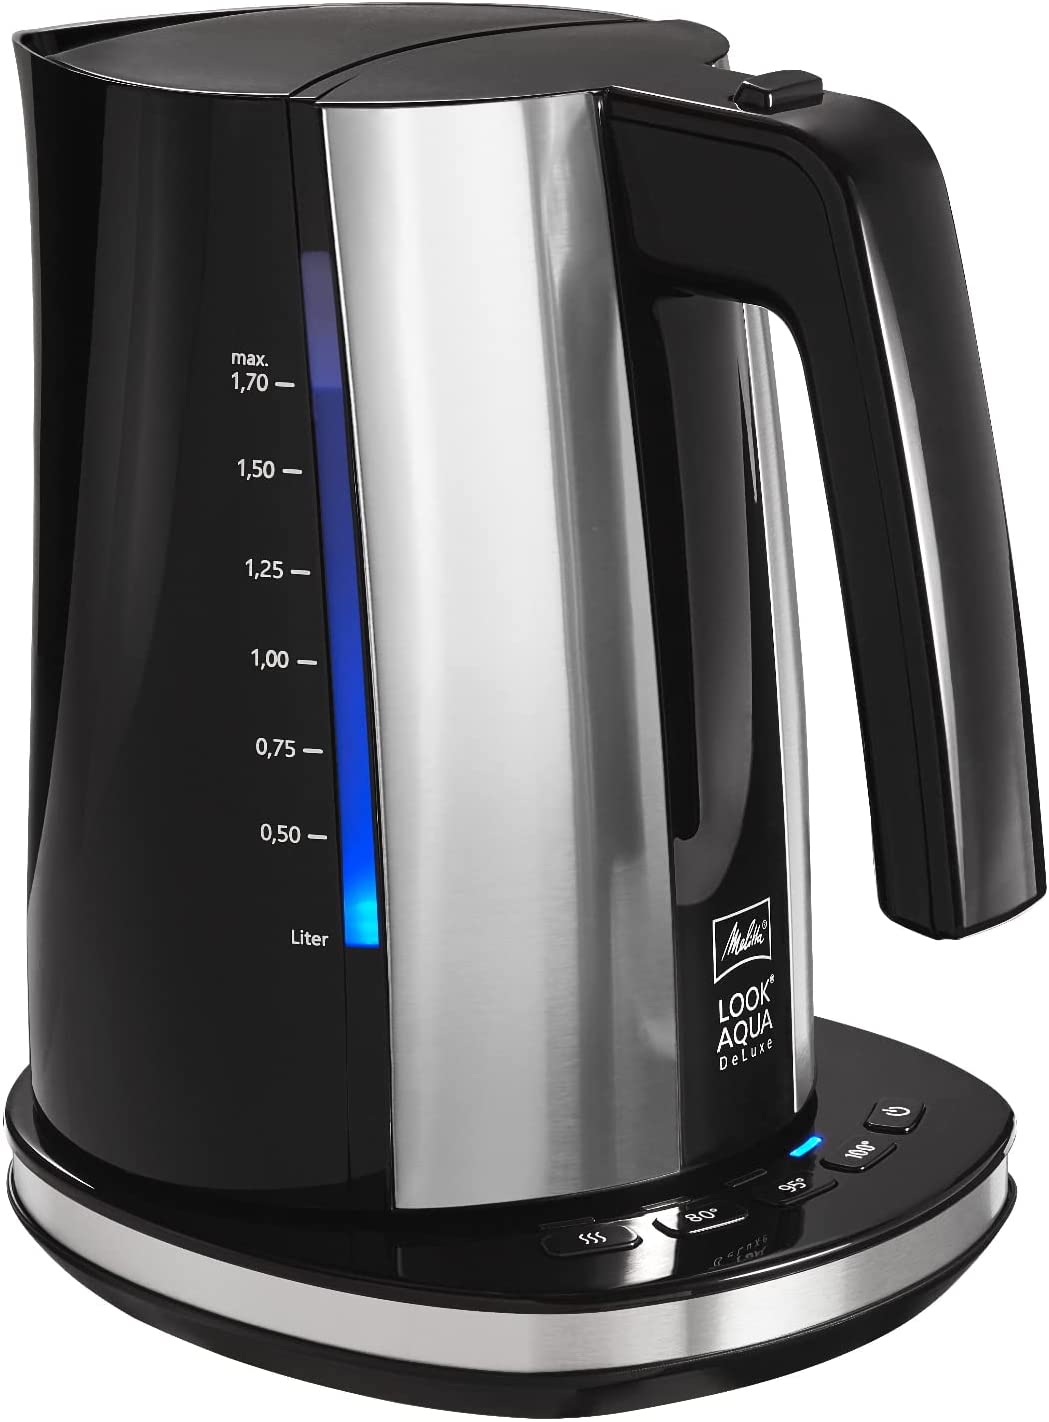 Kettle - MELITTA - Look Aqua Deluxe with temperature setting (80 ° C, 95 ° C, 100 ° C) for tea & baby food as well as keep warm function, plastic, 1.7 L